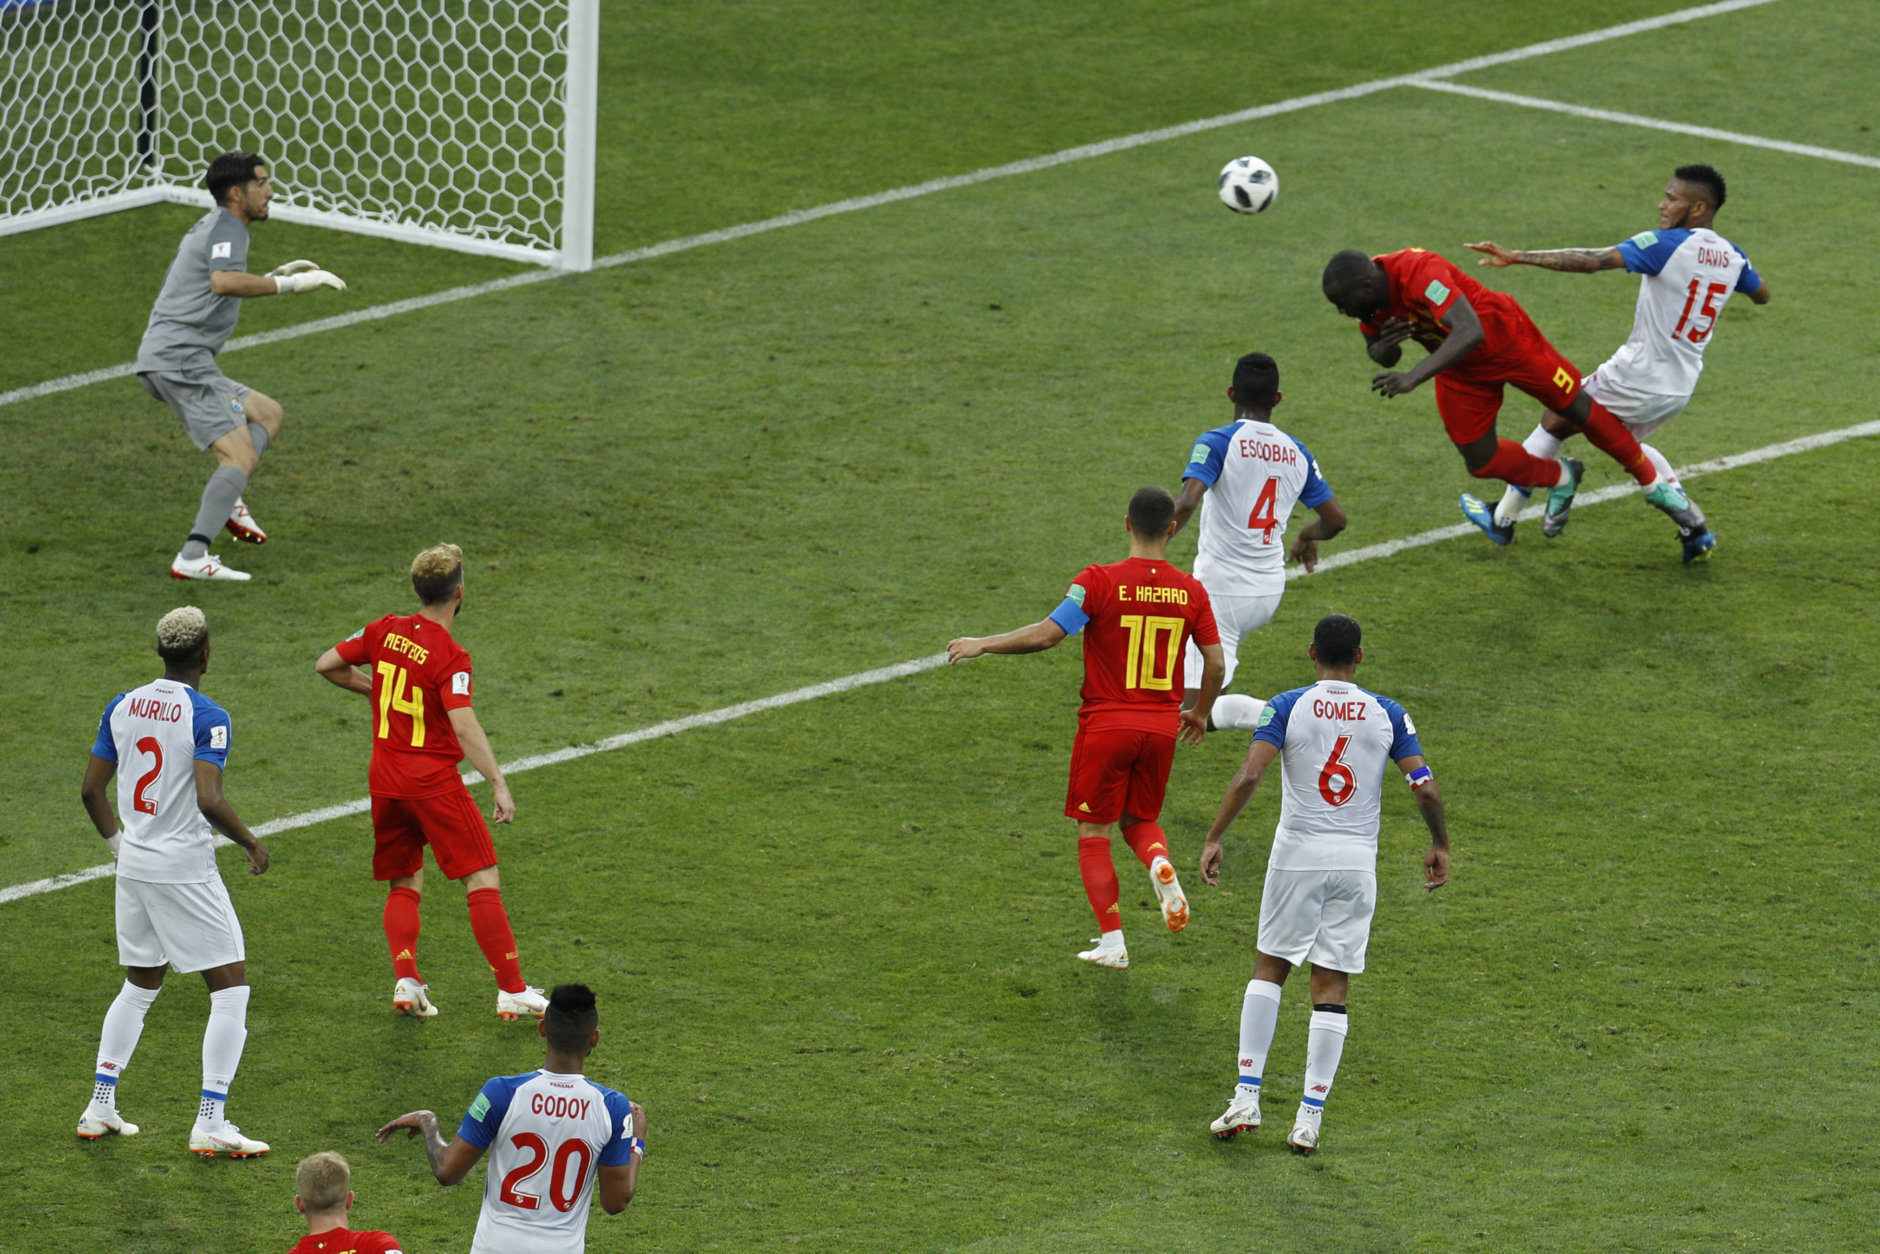 Belgium's Romelu Lukaku, top second right, heads the ball to score his side's second goal during the group G match between Belgium and Panama at the 2018 soccer World Cup in the Fisht Stadium in Sochi, Russia, Monday, June 18, 2018. (AP Photo/Victor R. Caivano)